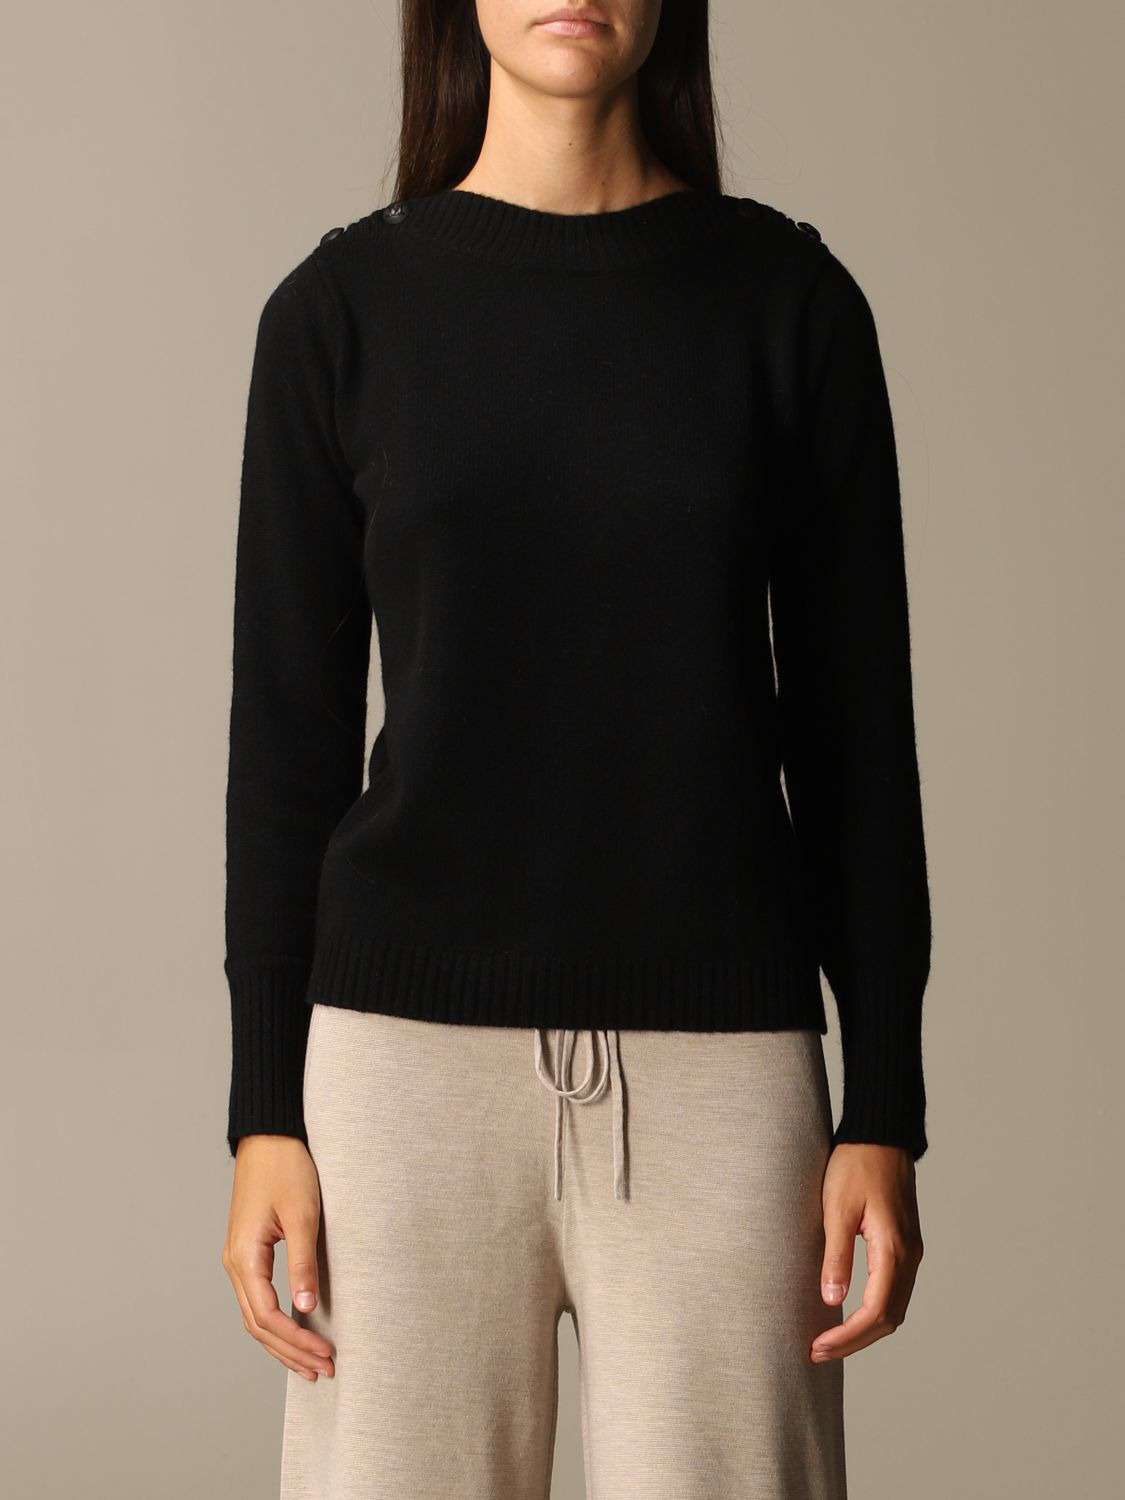 Max Mara Outlet: Pelota sweater with cashmere and wool buttons - Black ...